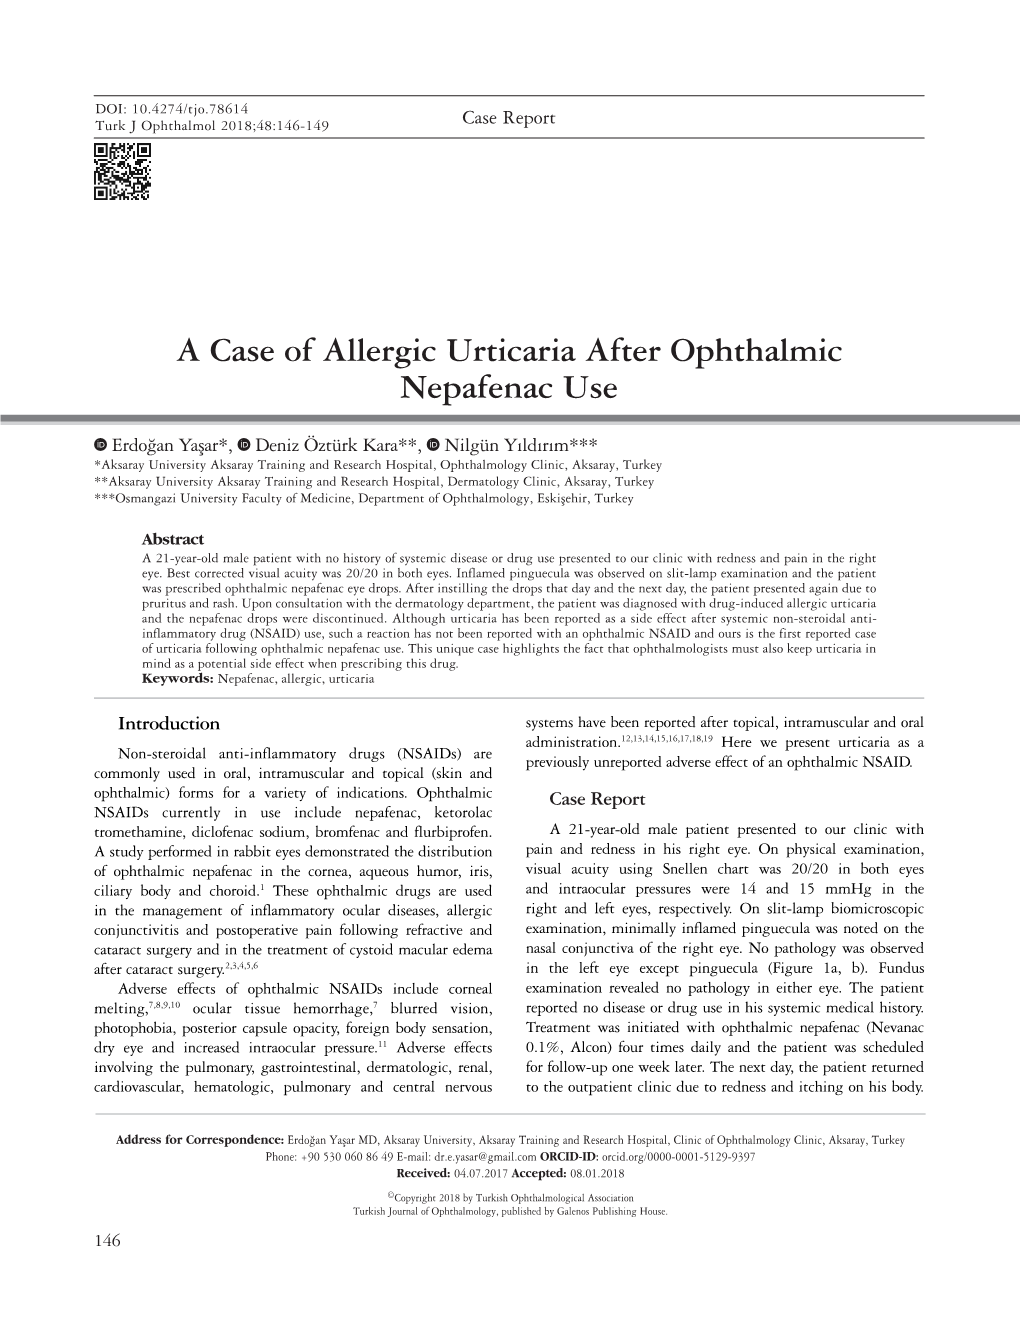 A Case of Allergic Urticaria After Ophthalmic Nepafenac Use